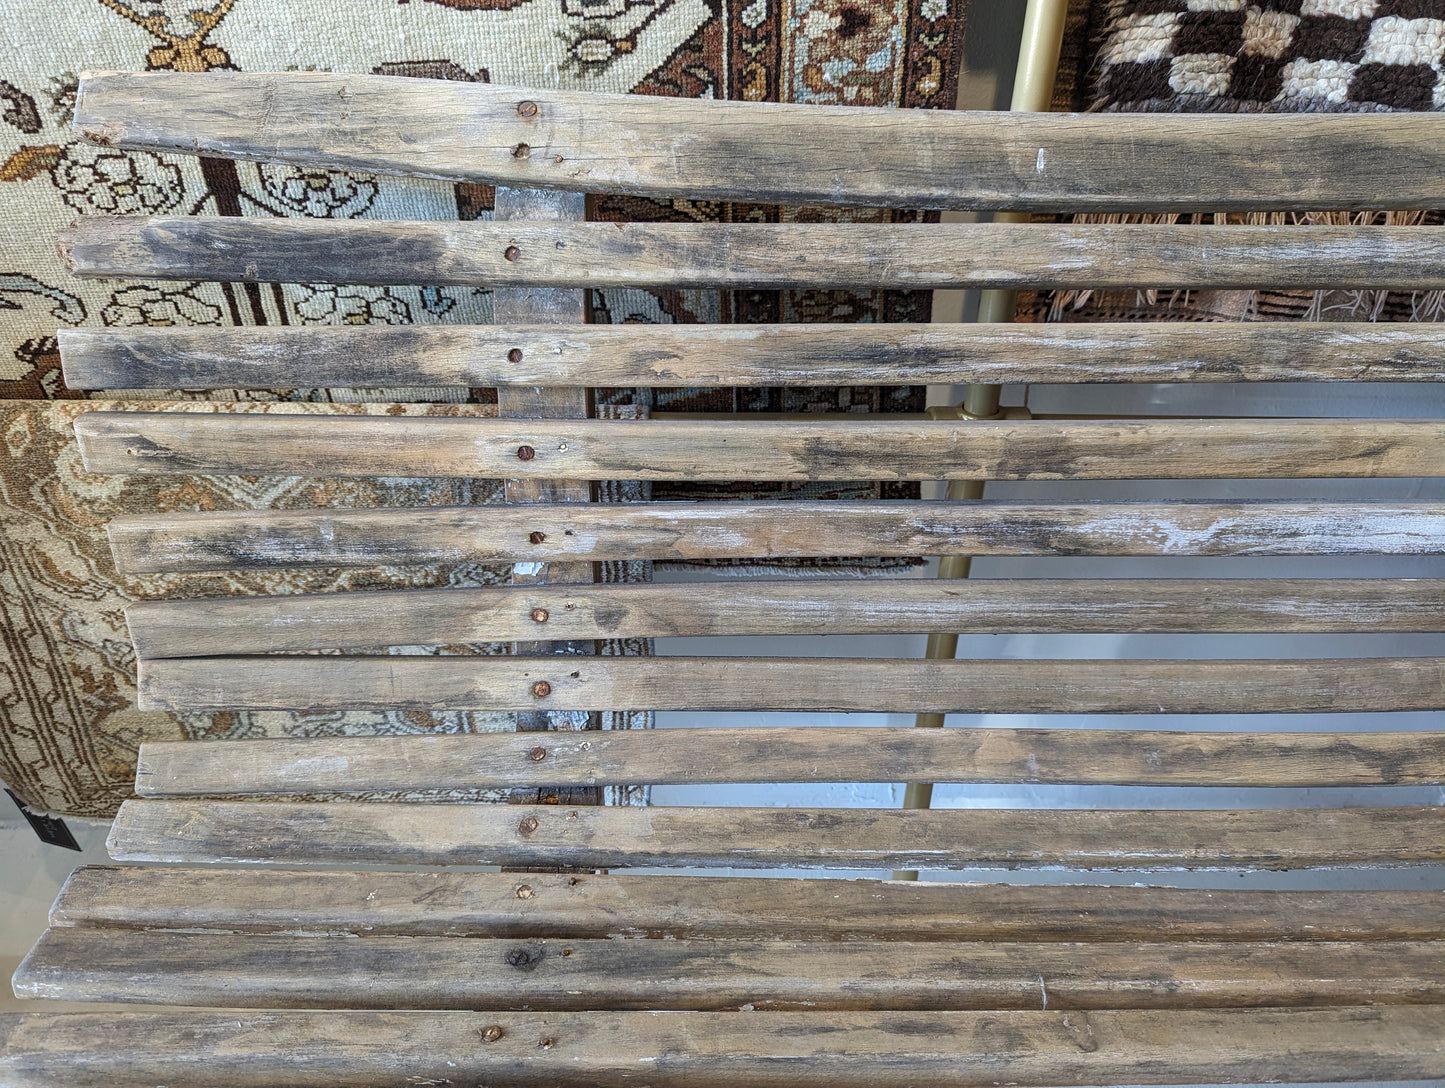 Long bench with weathered curvy whirkey rungs.